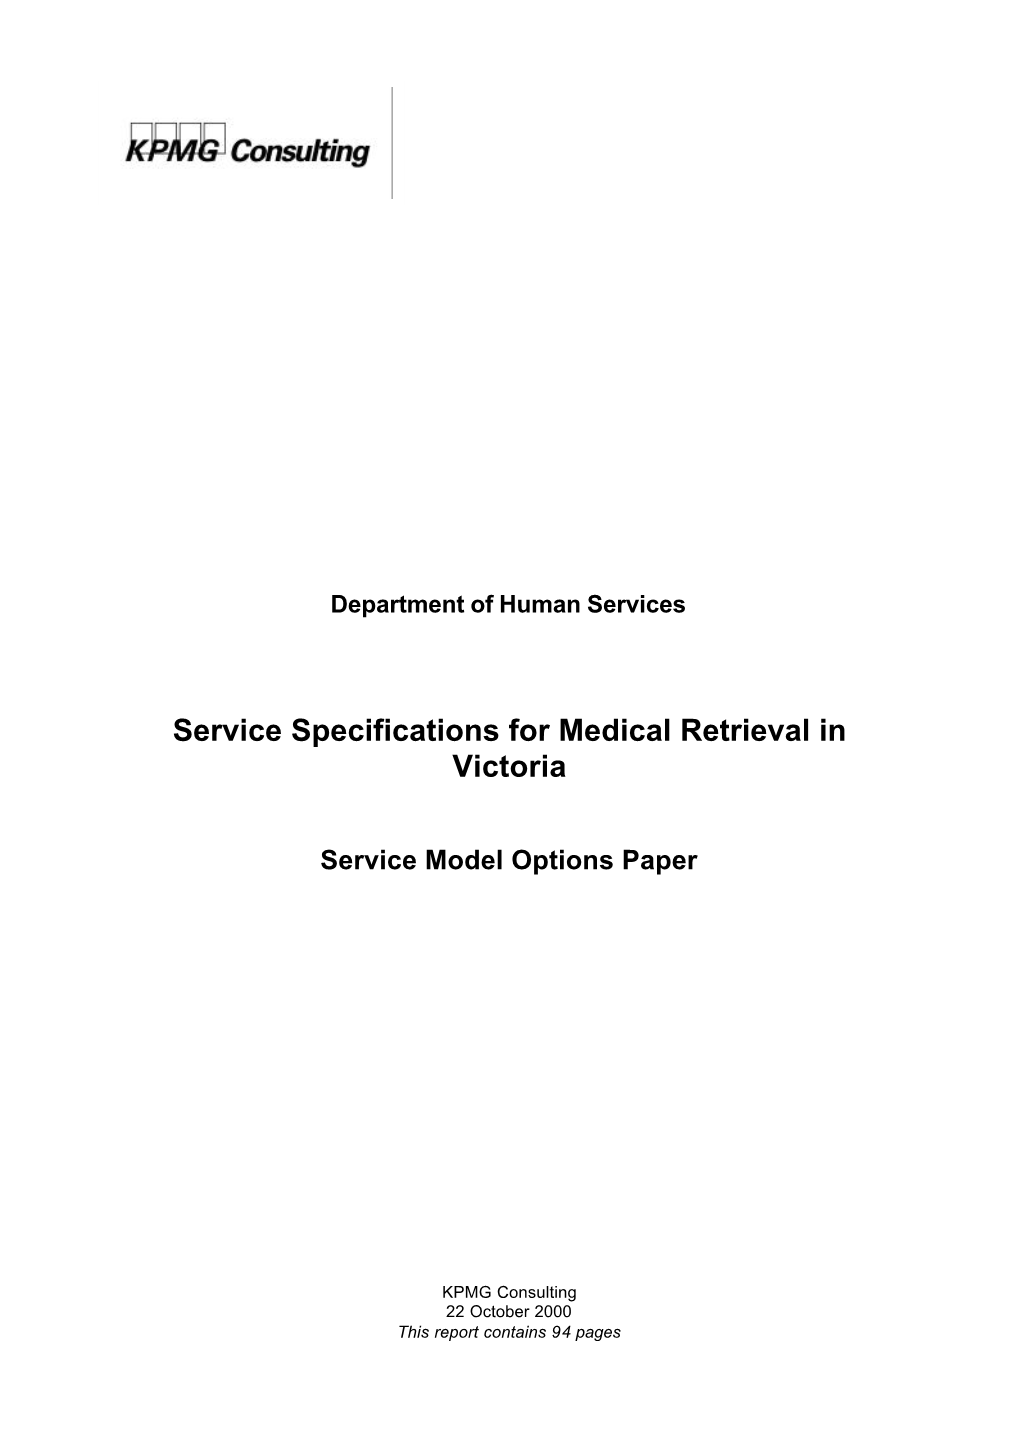 DHS Retrieval - Model Options Final.Doc - 22 October 2000 16:38 Service Specifications for Medical Retrieval in Victoria Department of Human Services